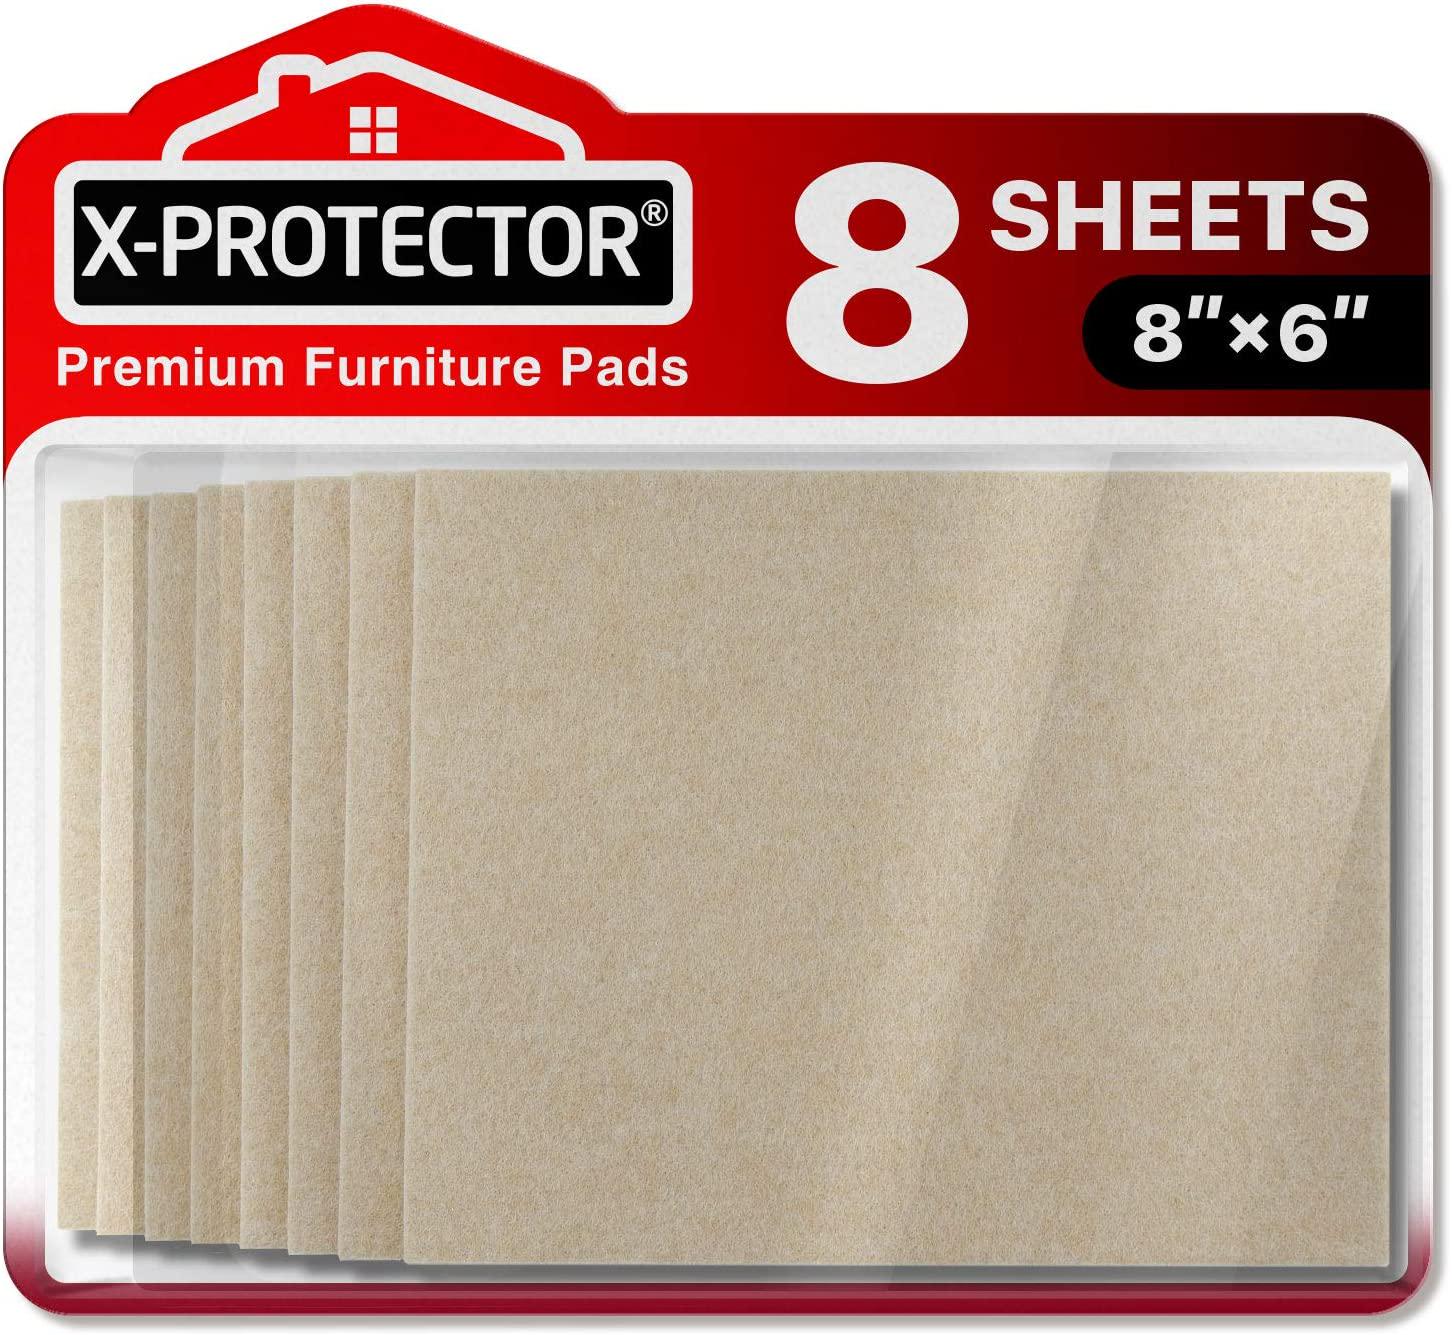 X-Protector, Felt Furniture Pads X-PROTECTOR 8 Pack Premium 8 x 6 - Heavy Duty Felt Sheets 1/5 Thickness! Cut Furniture Felt Pads for Furniture Feet You Need - Perfect Furniture Pads for Hardwood Floors!